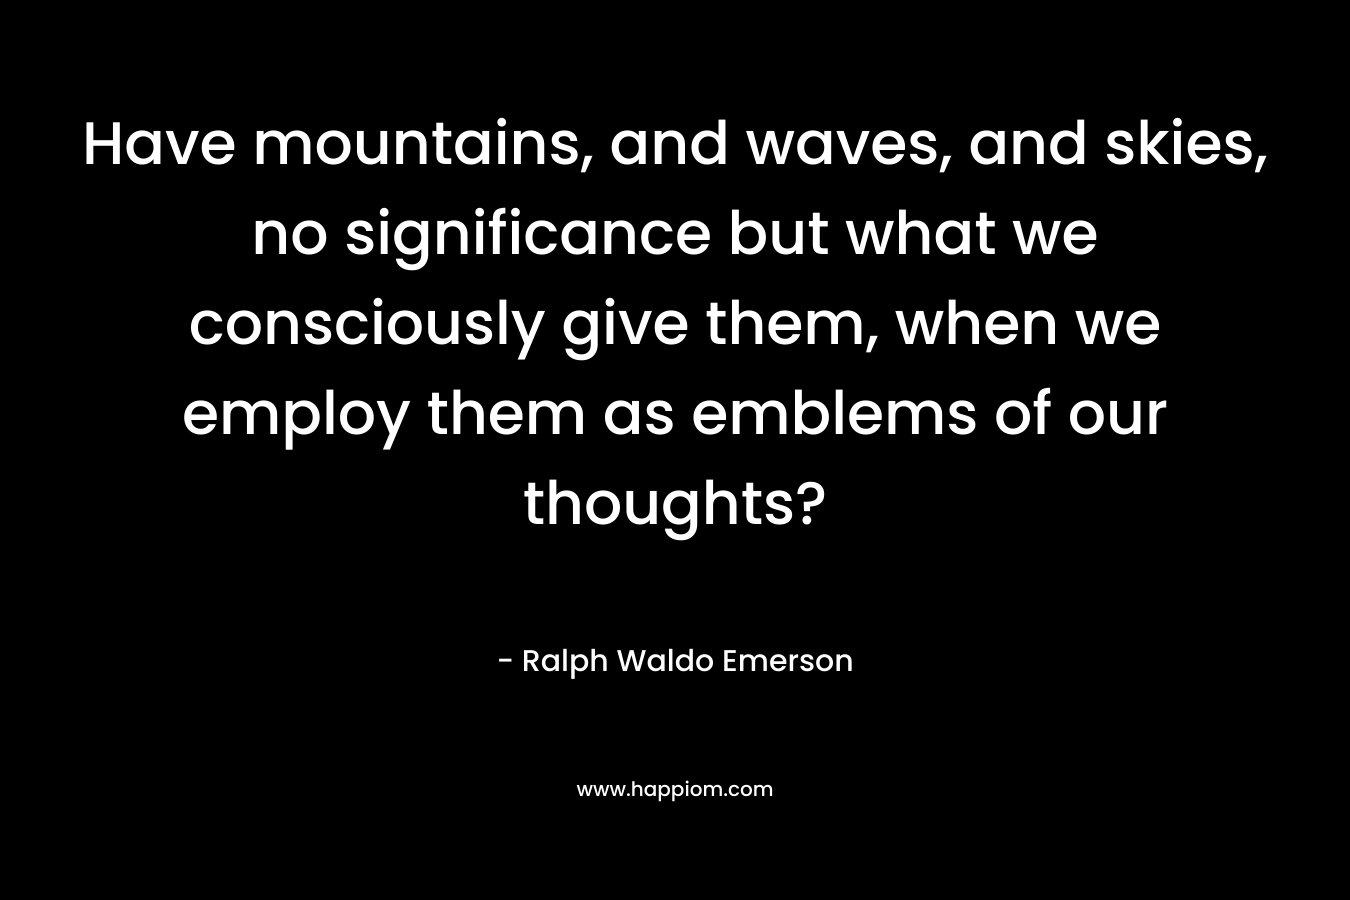 Have mountains, and waves, and skies, no significance but what we consciously give them, when we employ them as emblems of our thoughts?